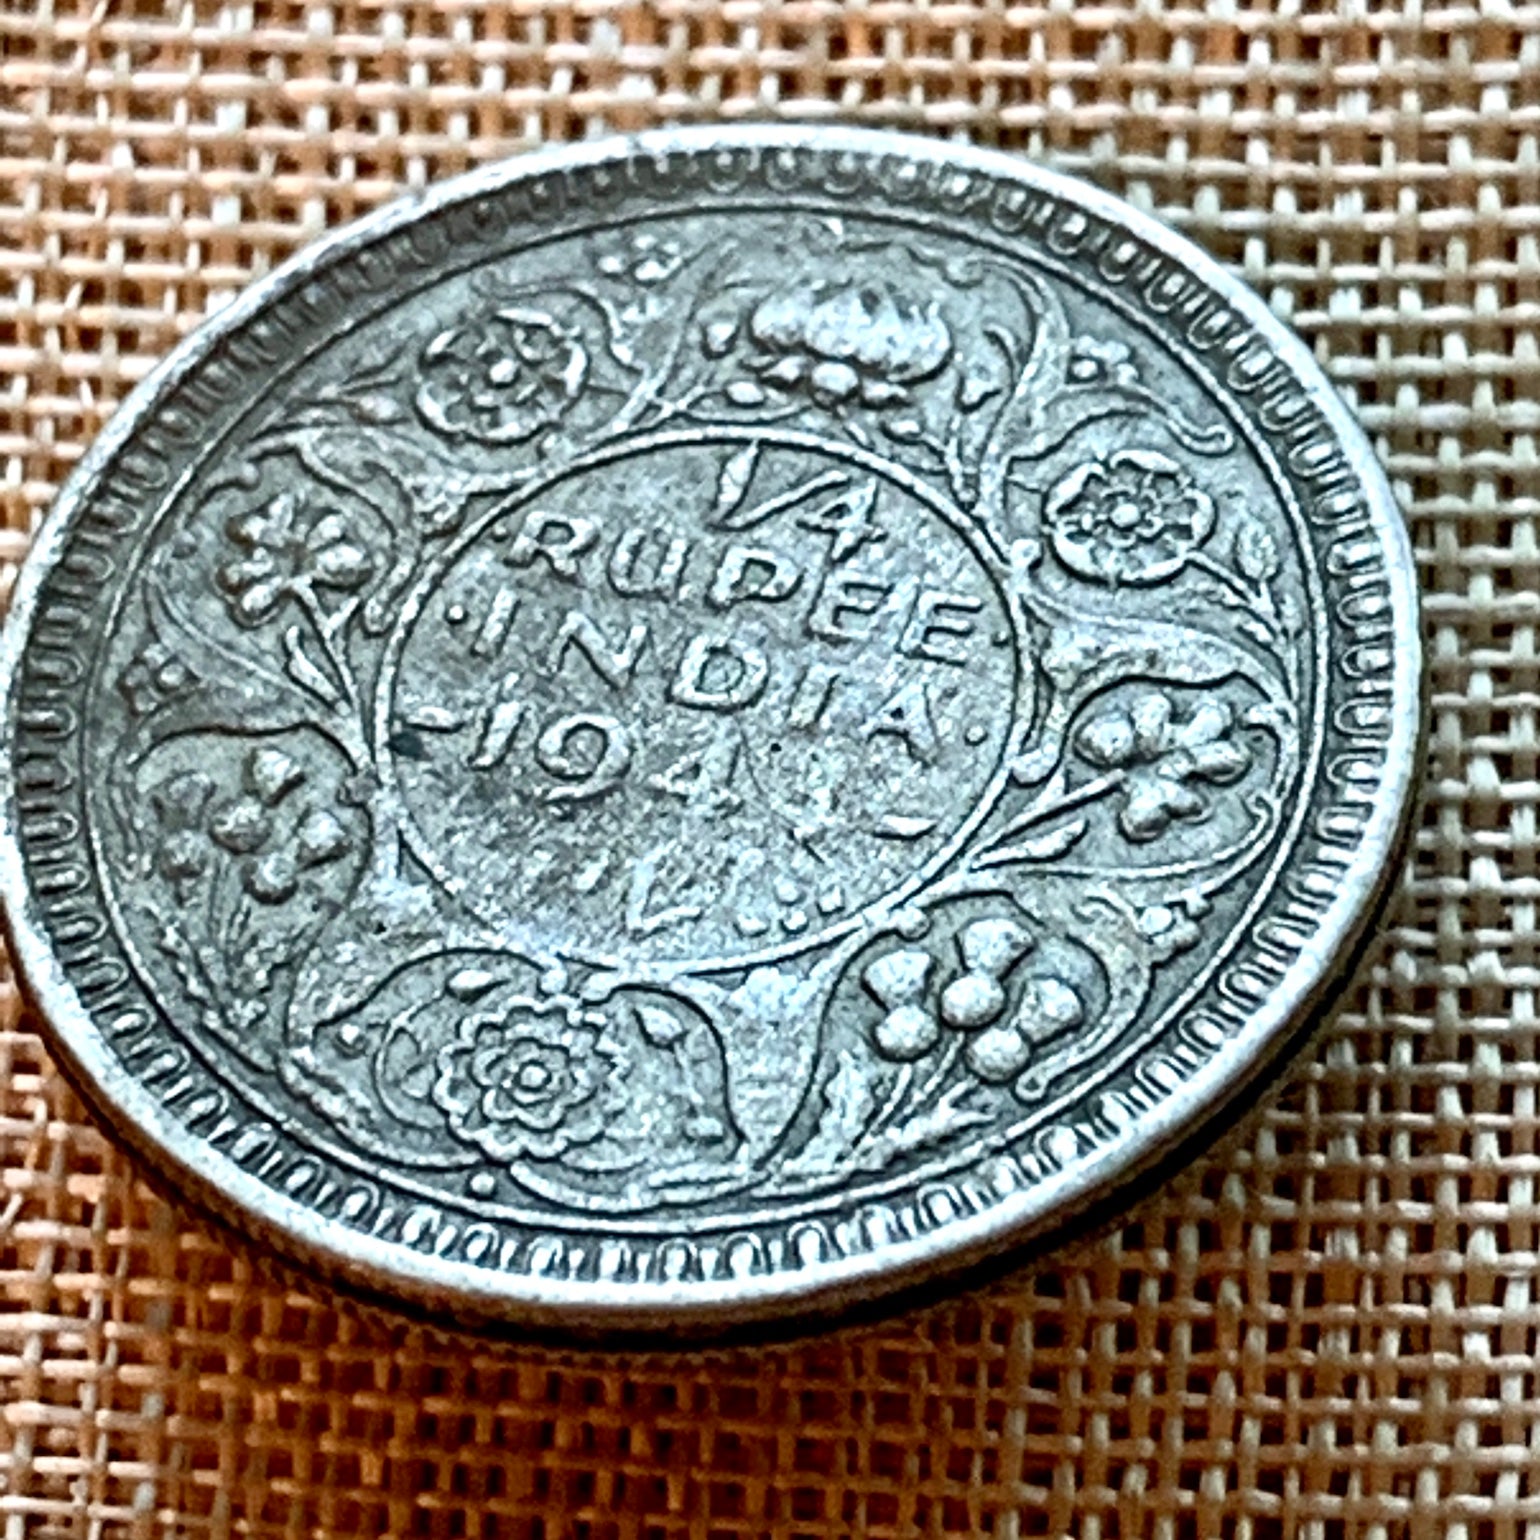 Large Afghan Silver Buttons